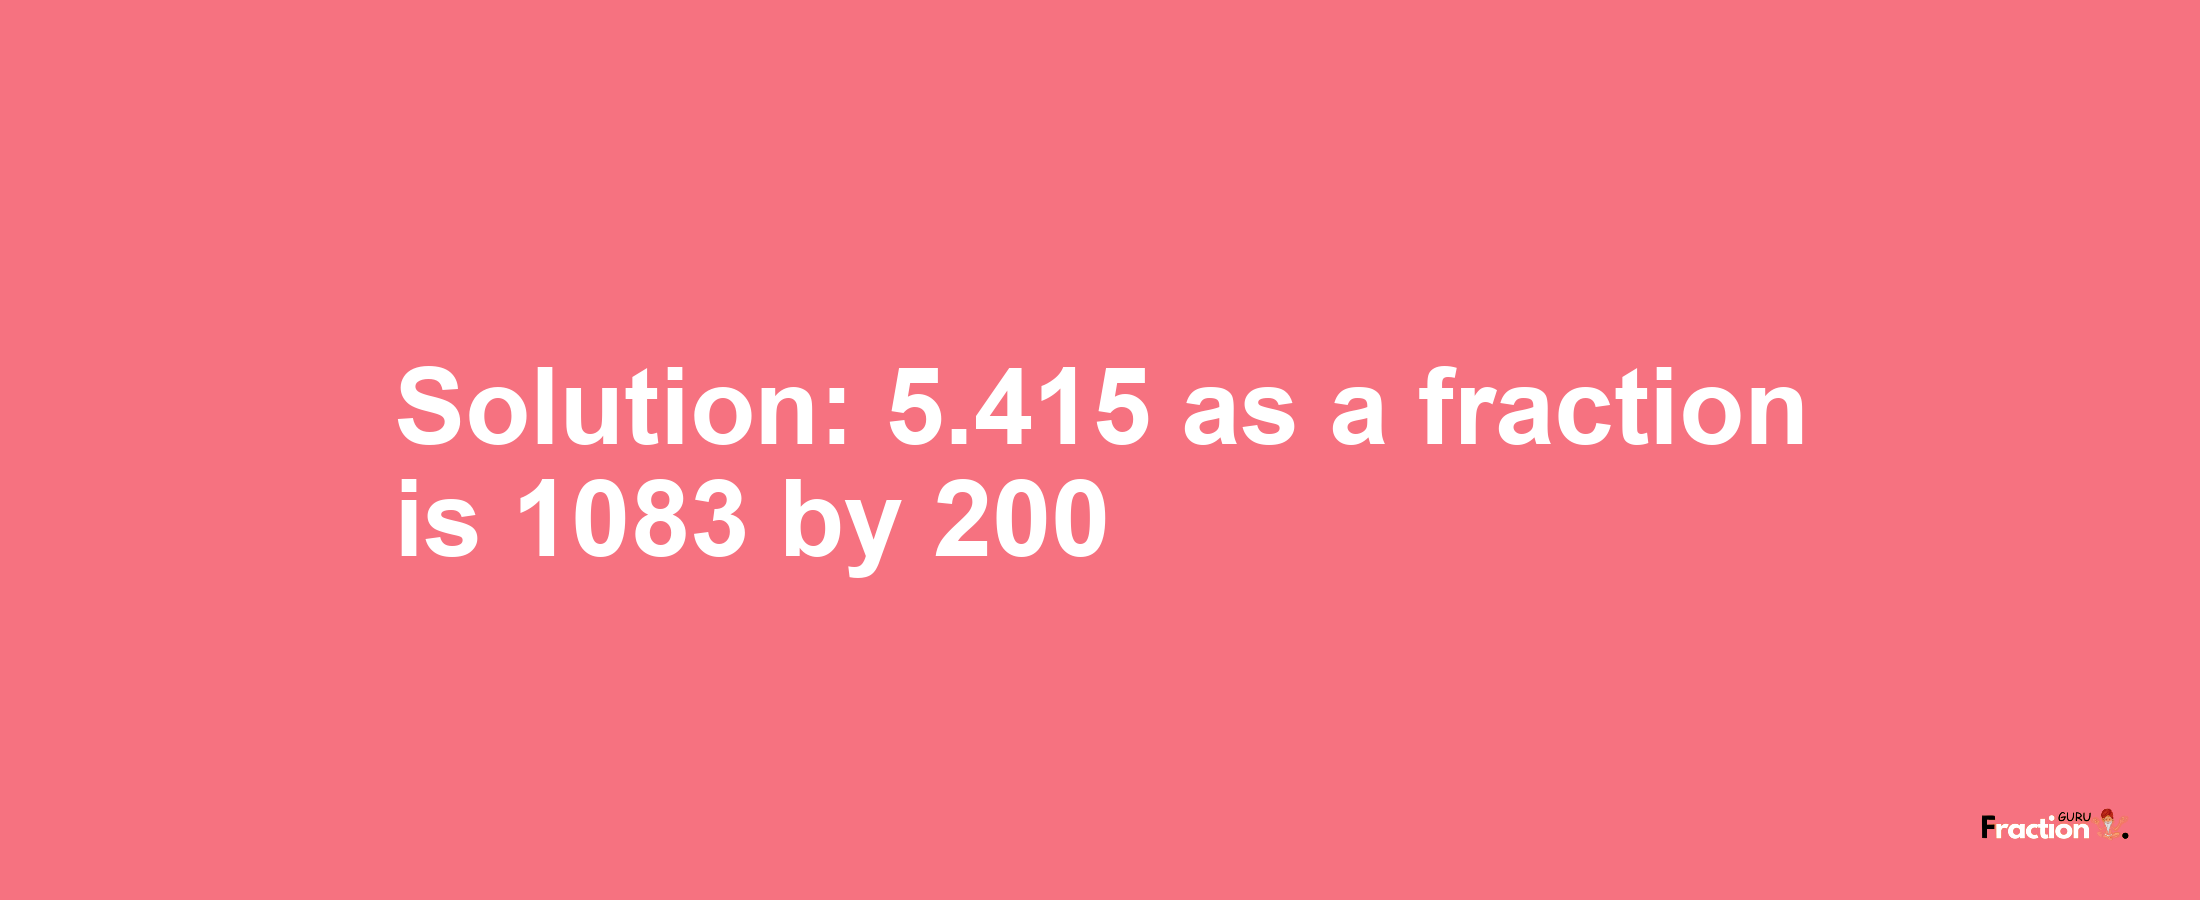 Solution:5.415 as a fraction is 1083/200